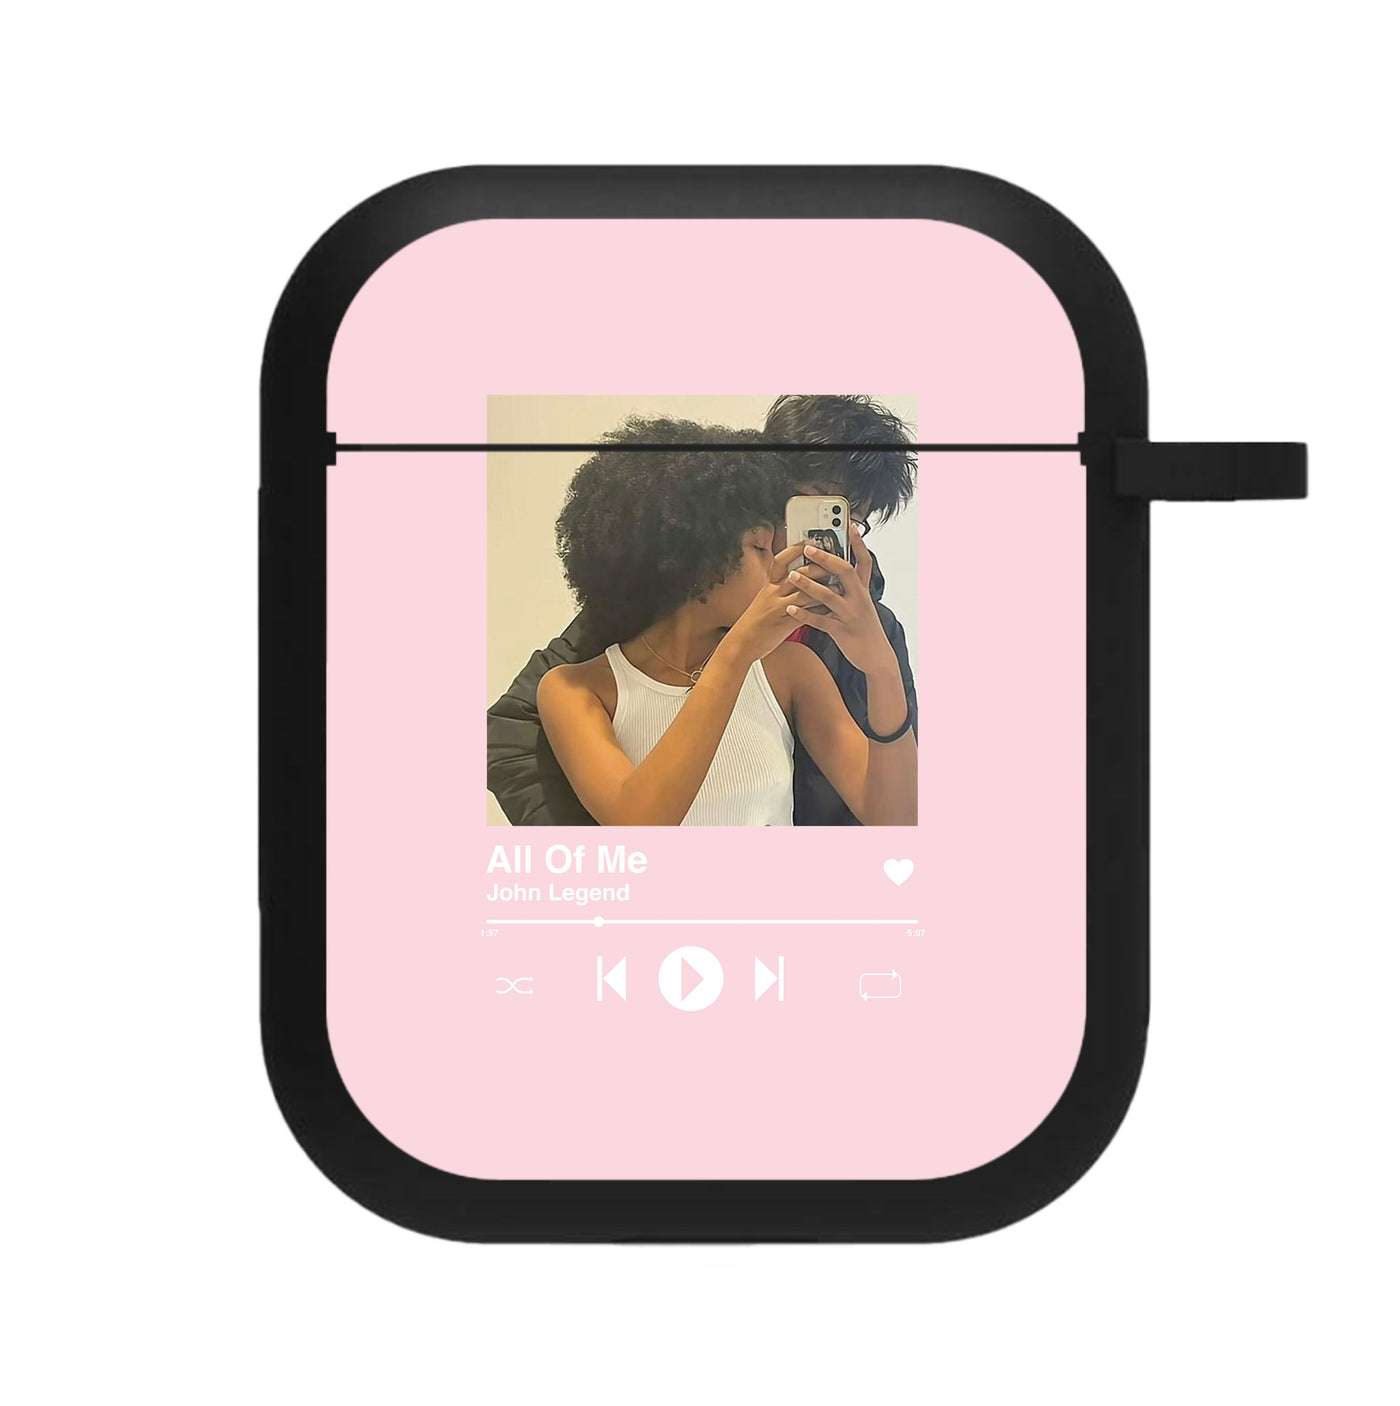 Album Cover - Personalised Couples AirPods Case